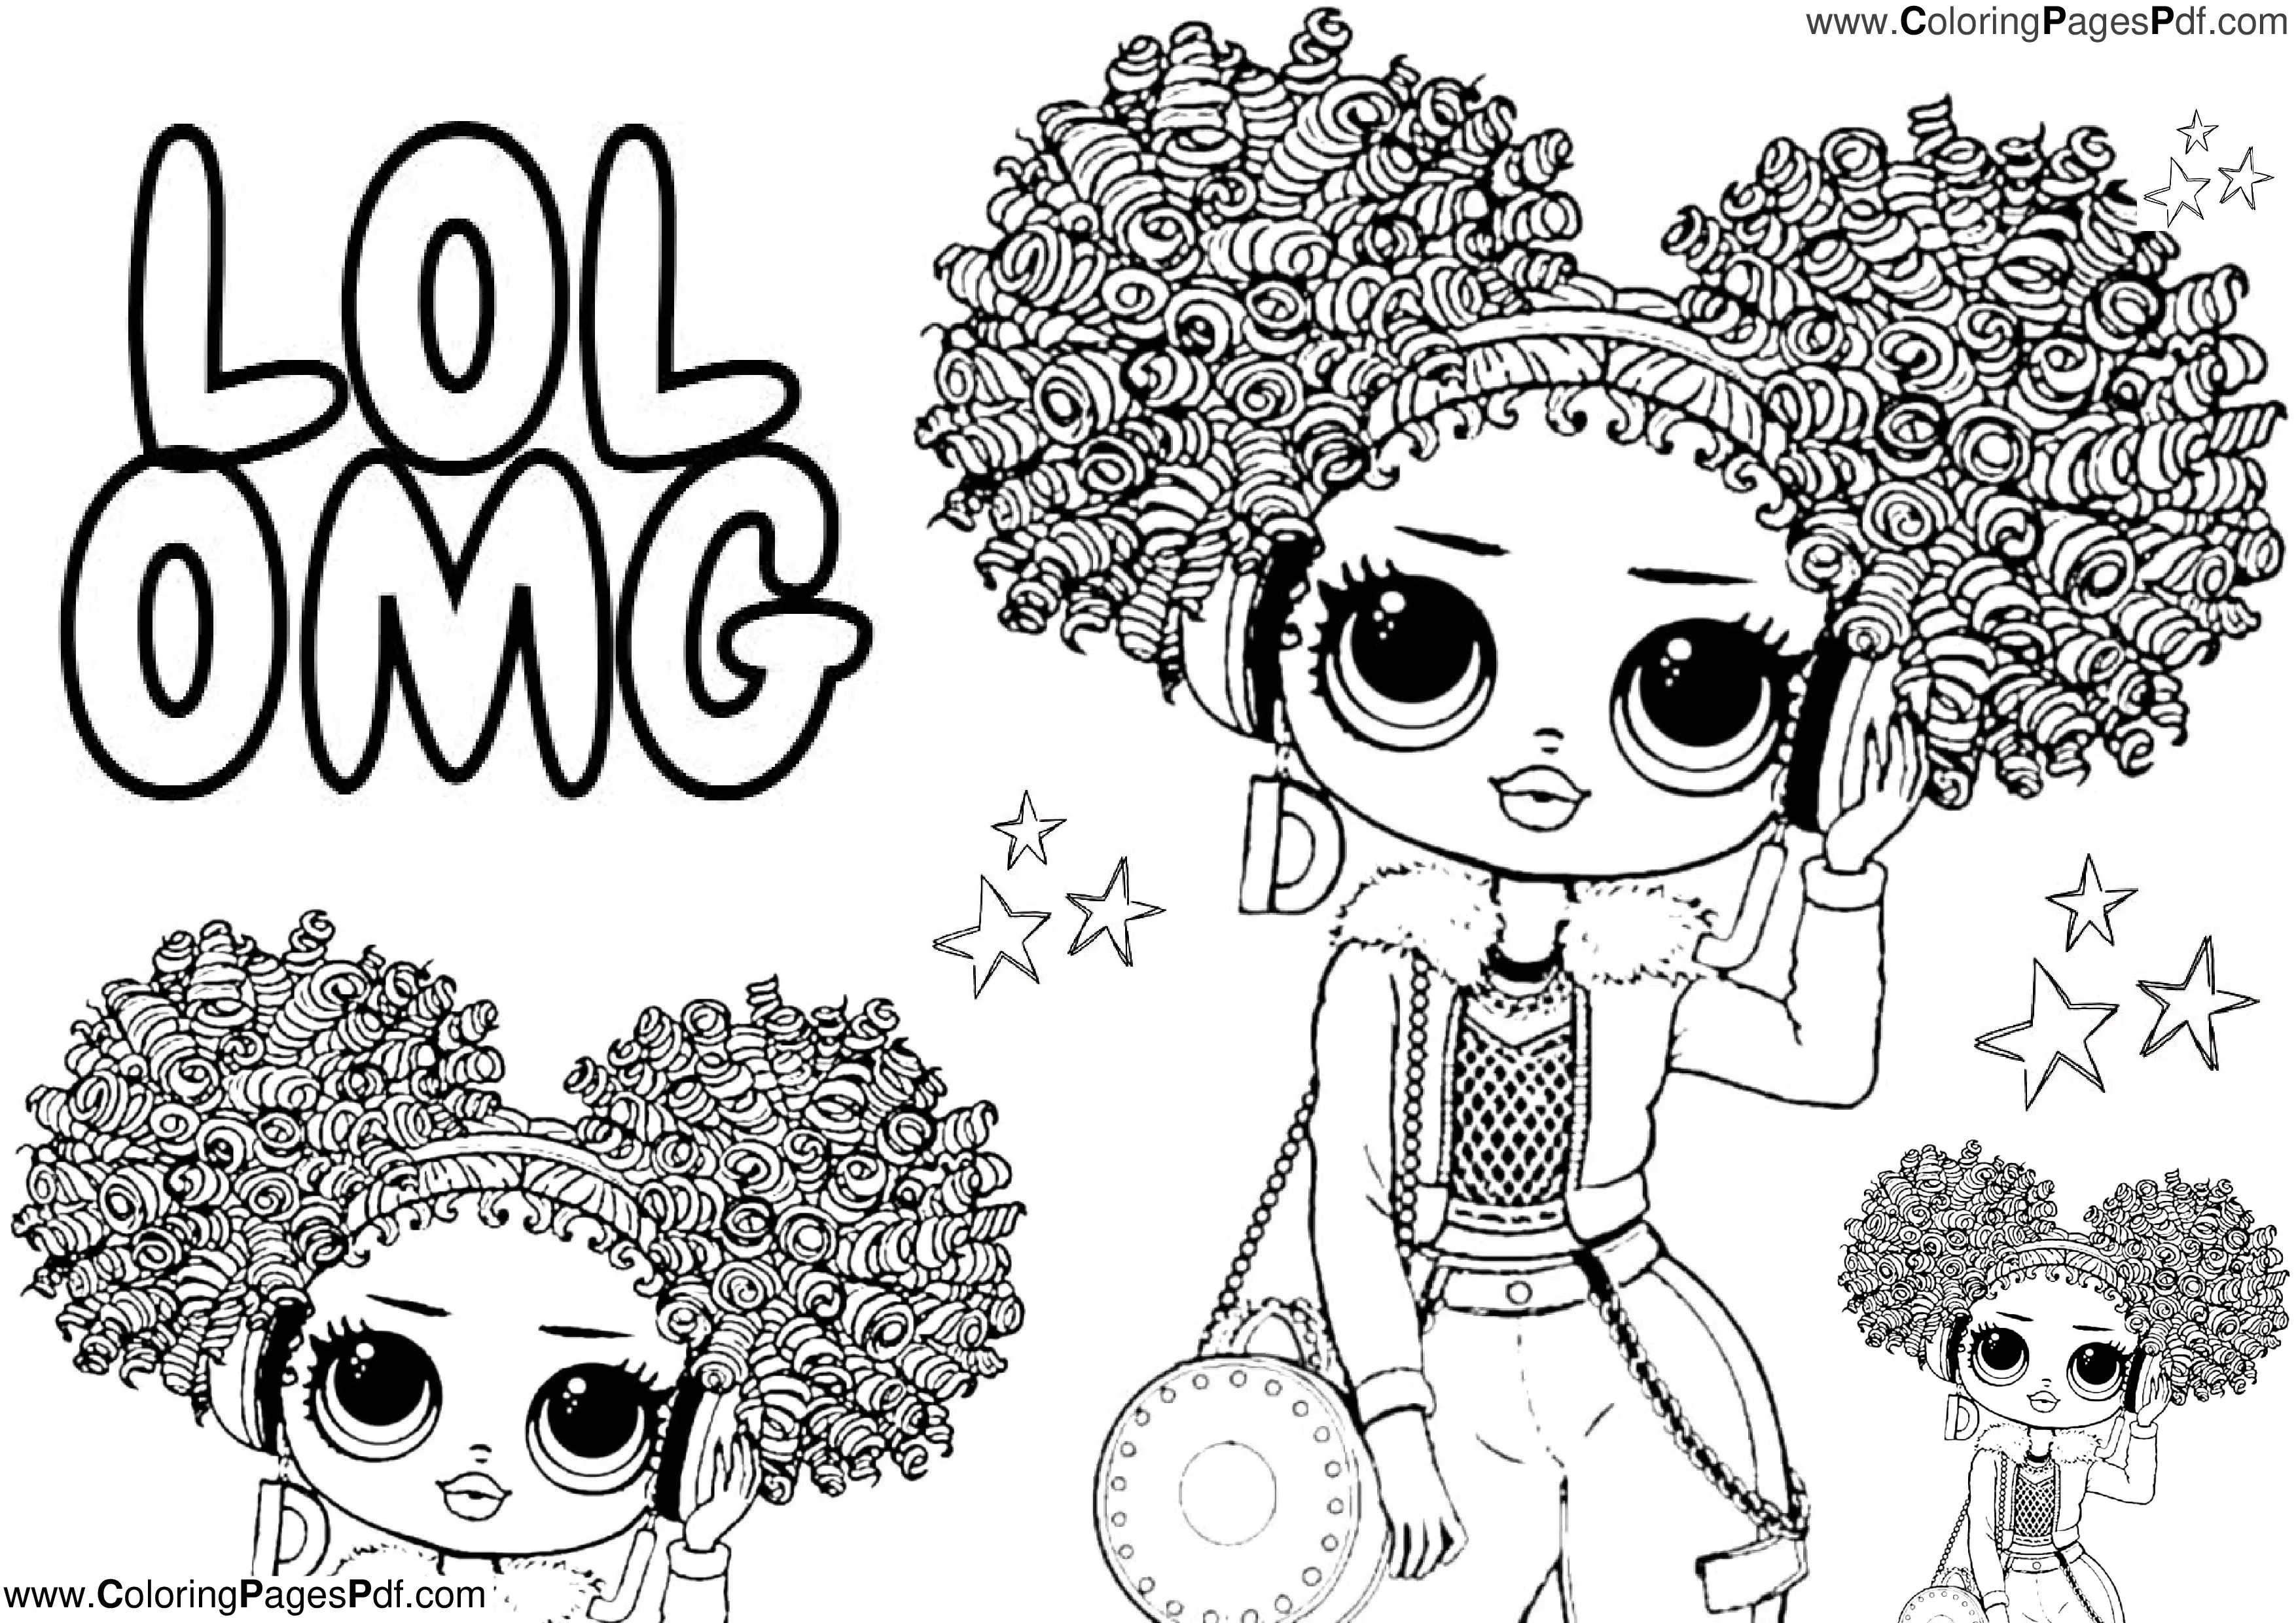 Free Lol OMG coloring pages